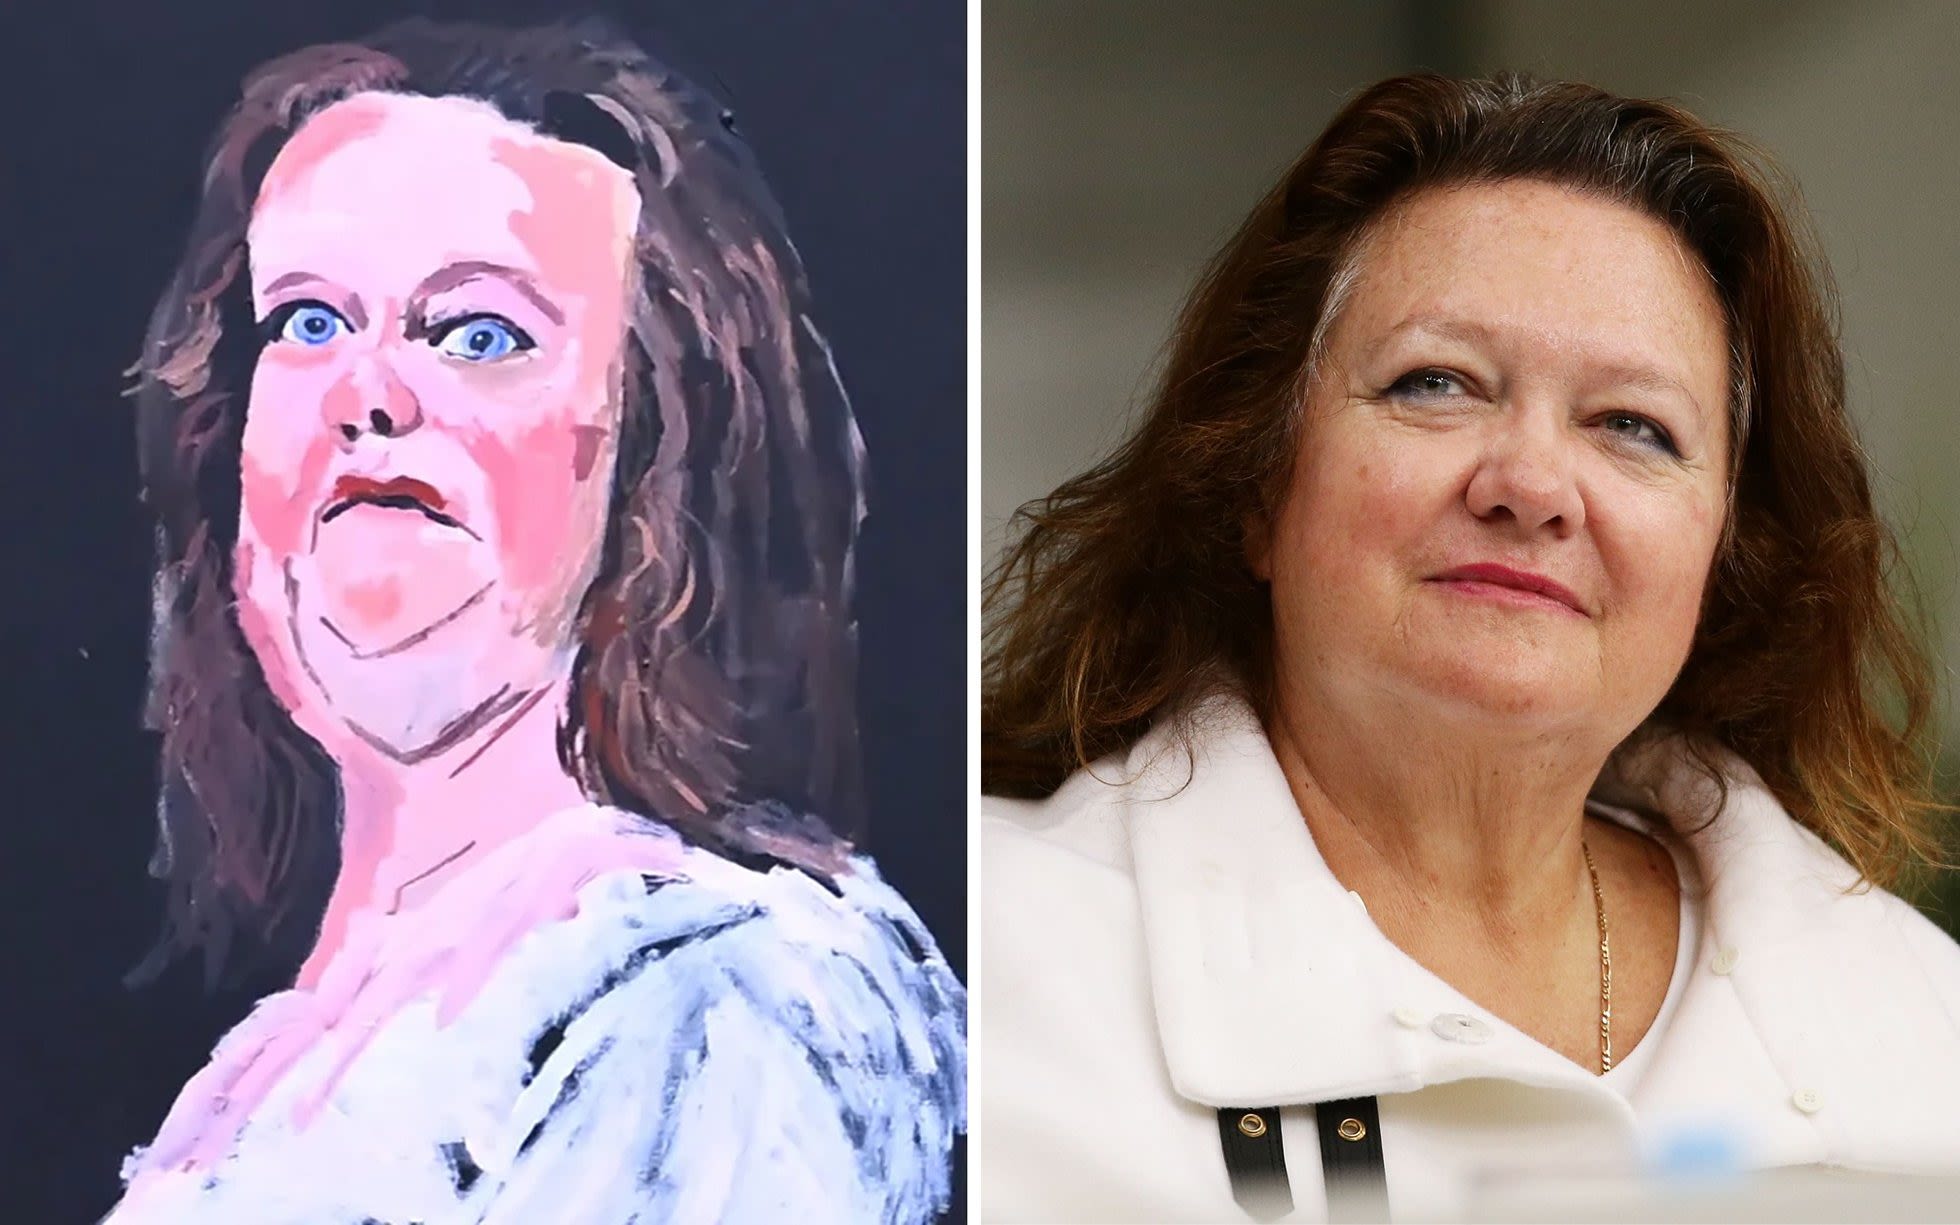 Australia’s richest woman demands portrait be removed from national gallery